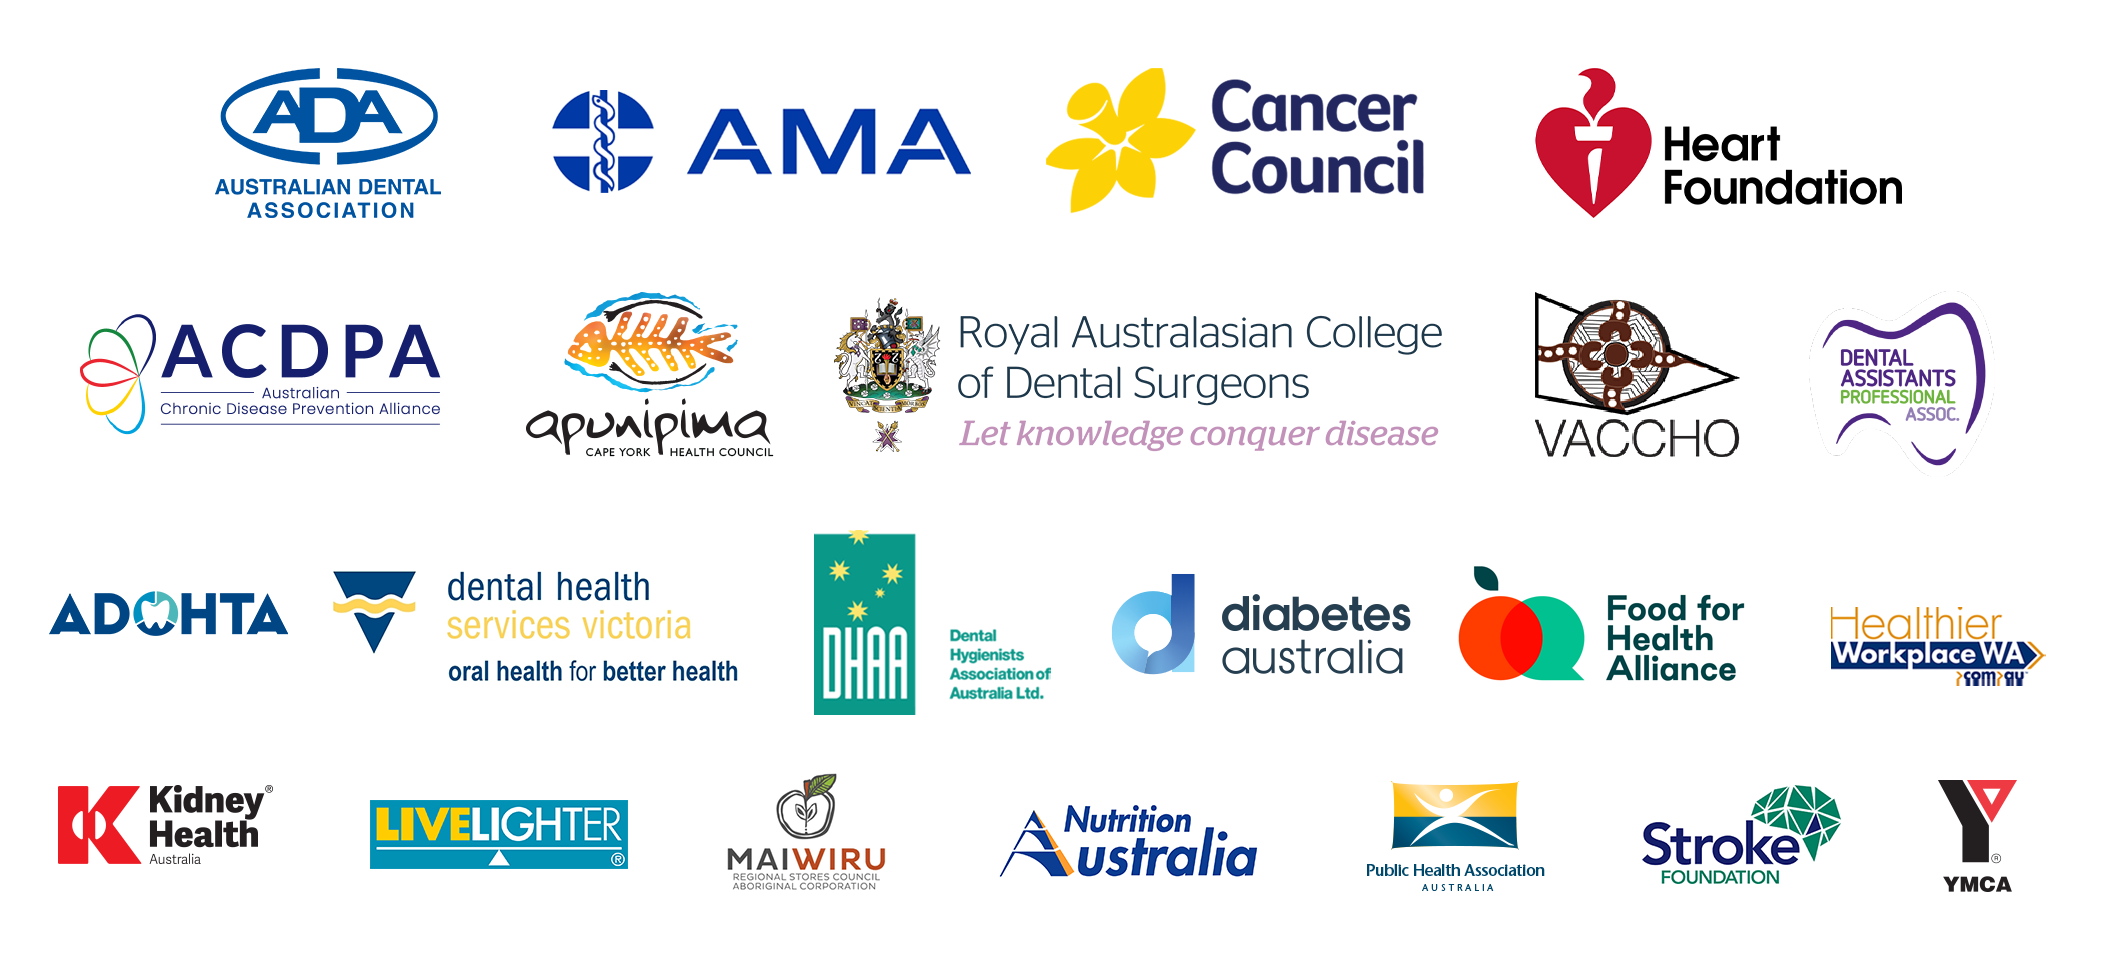 Rethink Sugary Drink partner organisations (Apunipuma, ADOHTA, Australian Dental Association, Cancer Council, Dental Health Services Victoria, Dental Hygenists Association of Australia, Diabetes Australia, Healthier Workplace WA, Heart Foundation, Kidney Health Australia, LiveLighter, Obesity Policy Coalition, Parents Voice, PHAA, VACCHO, YMCA), Royal Australasian College of Dental Surgeons